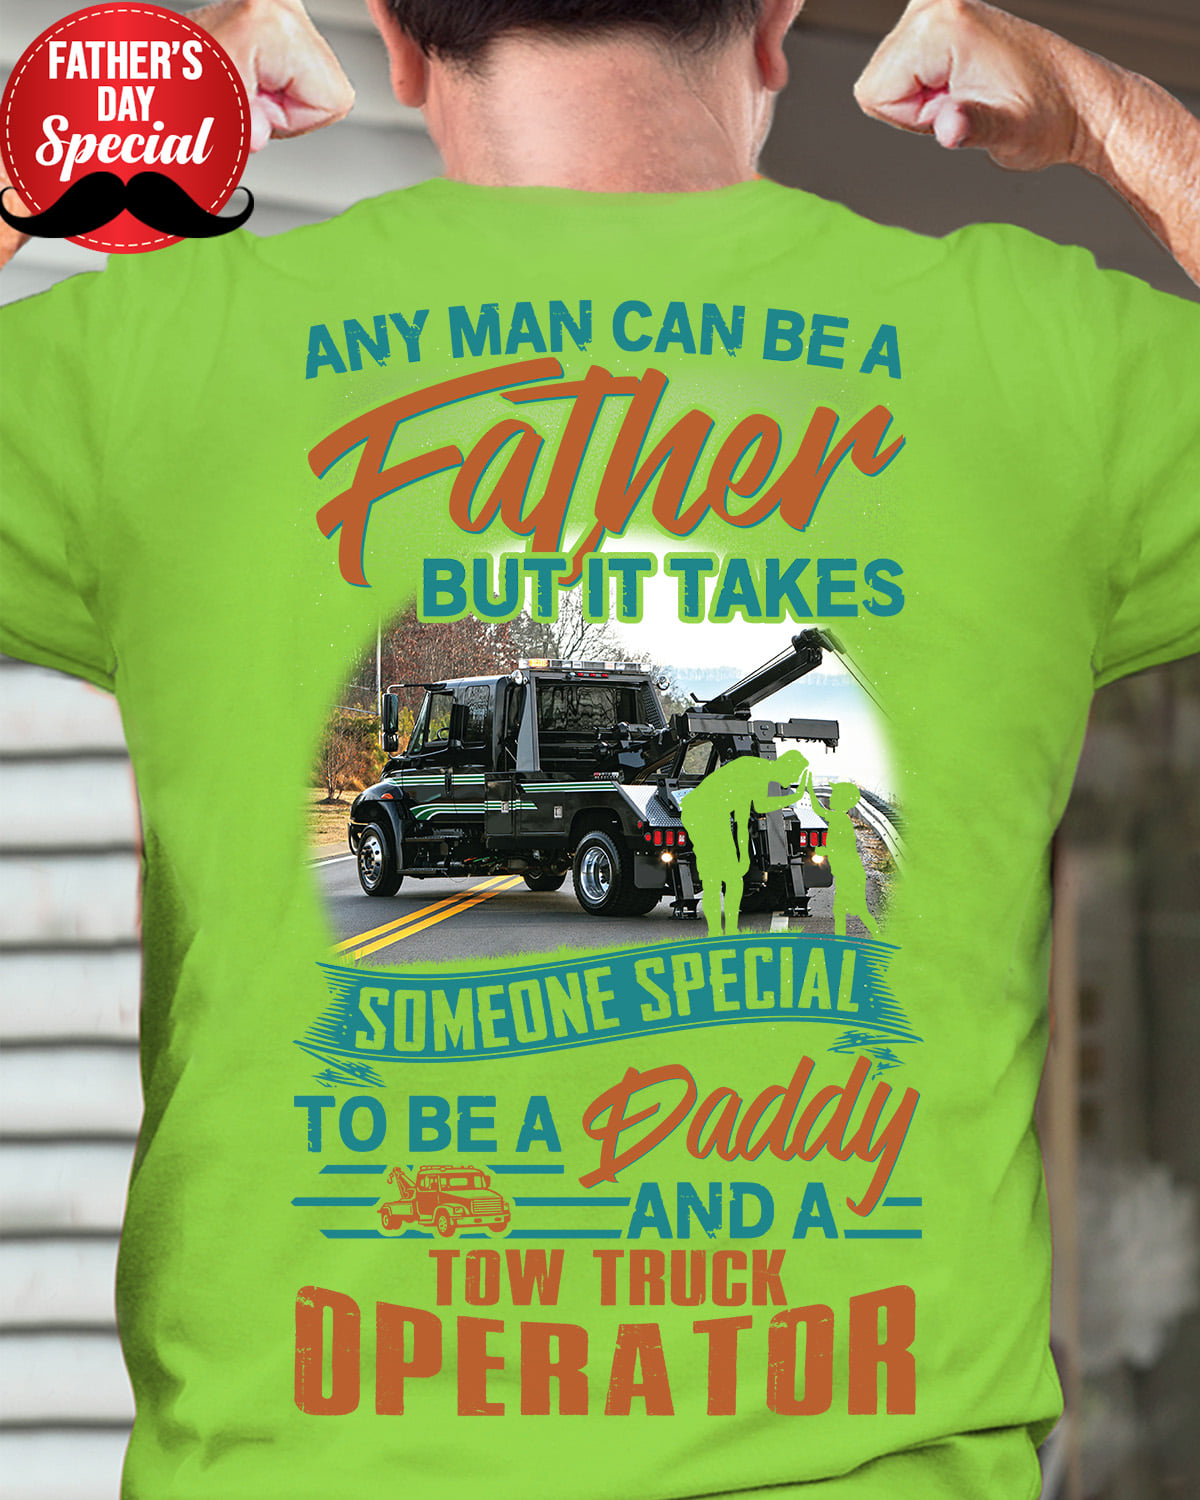 Any man can be a father but it takes someone special to be a daddy and a Tow truck operator